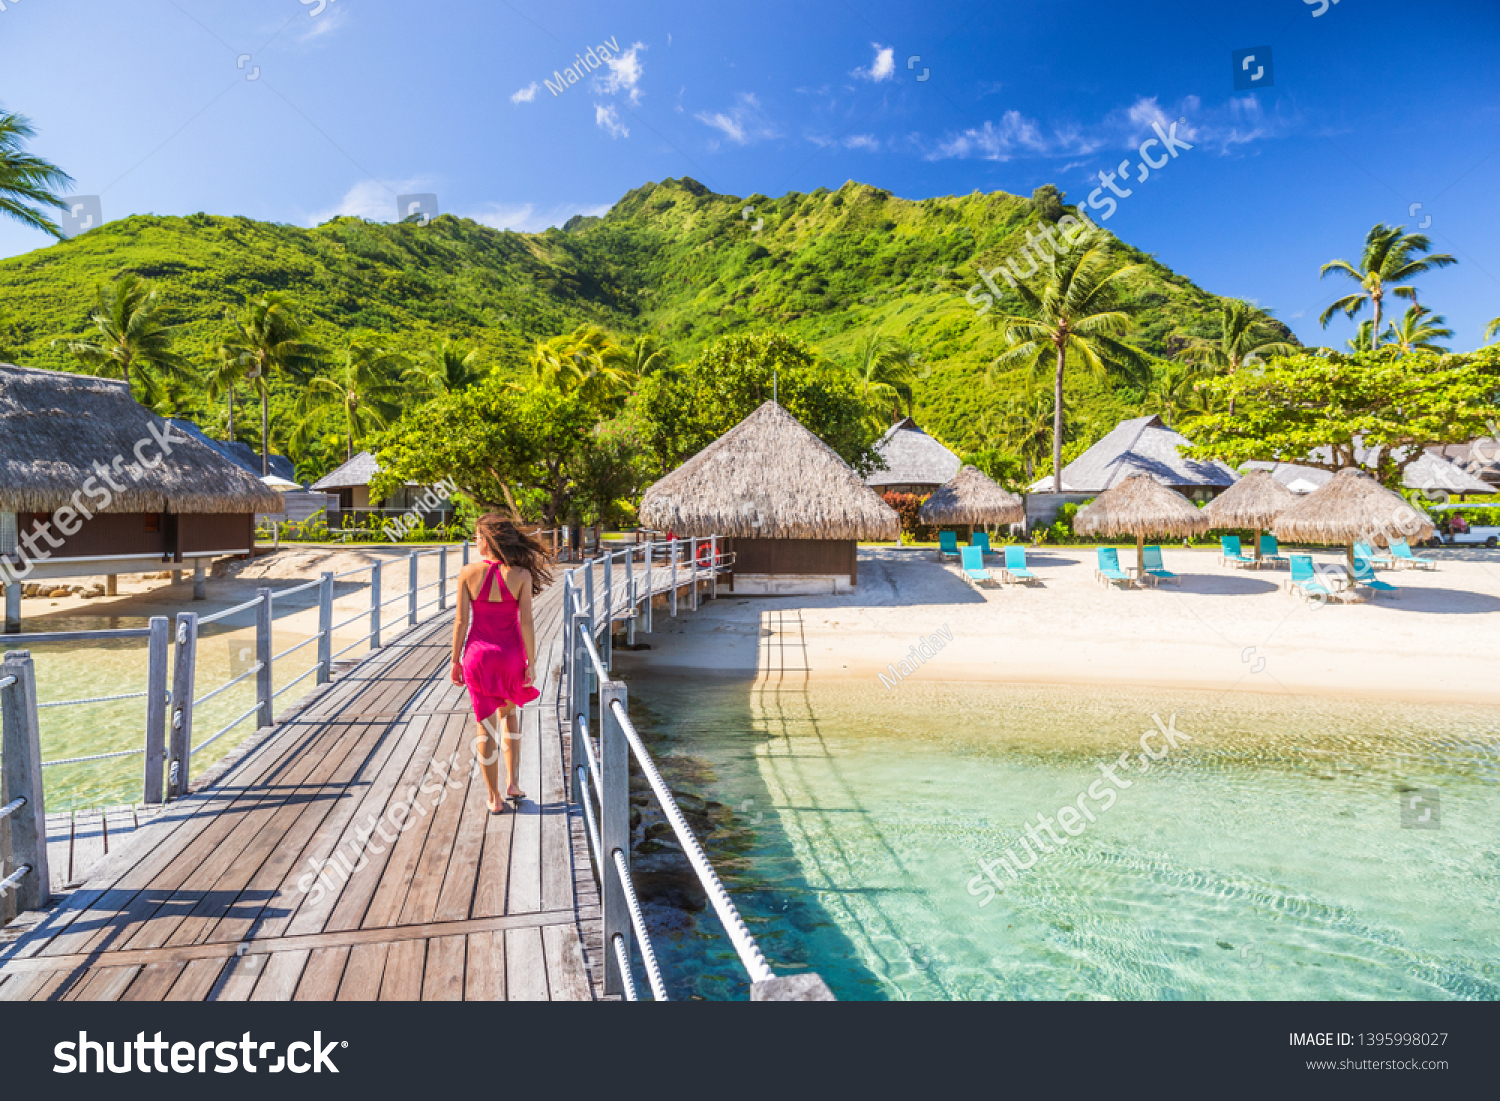 Overwater bungalow hotel resort in Tahiti, Moorea island. Person on holiday relaxing at French polynesia luxury destination. #1395998027